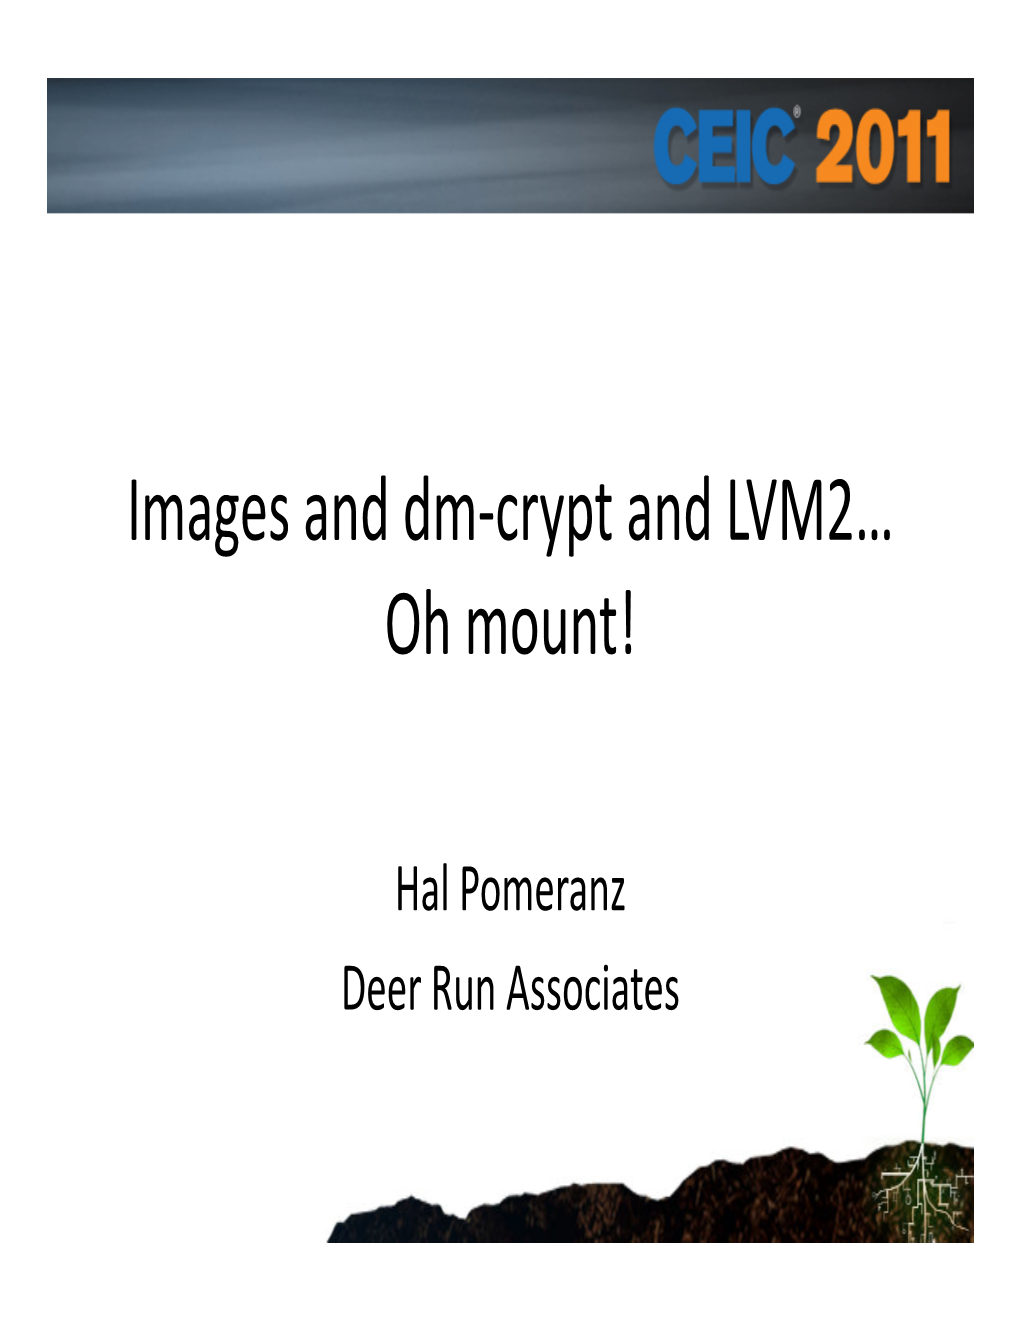 Images and Dm-Crypt and LVM2… Oh Mount! Speaker Name and Info